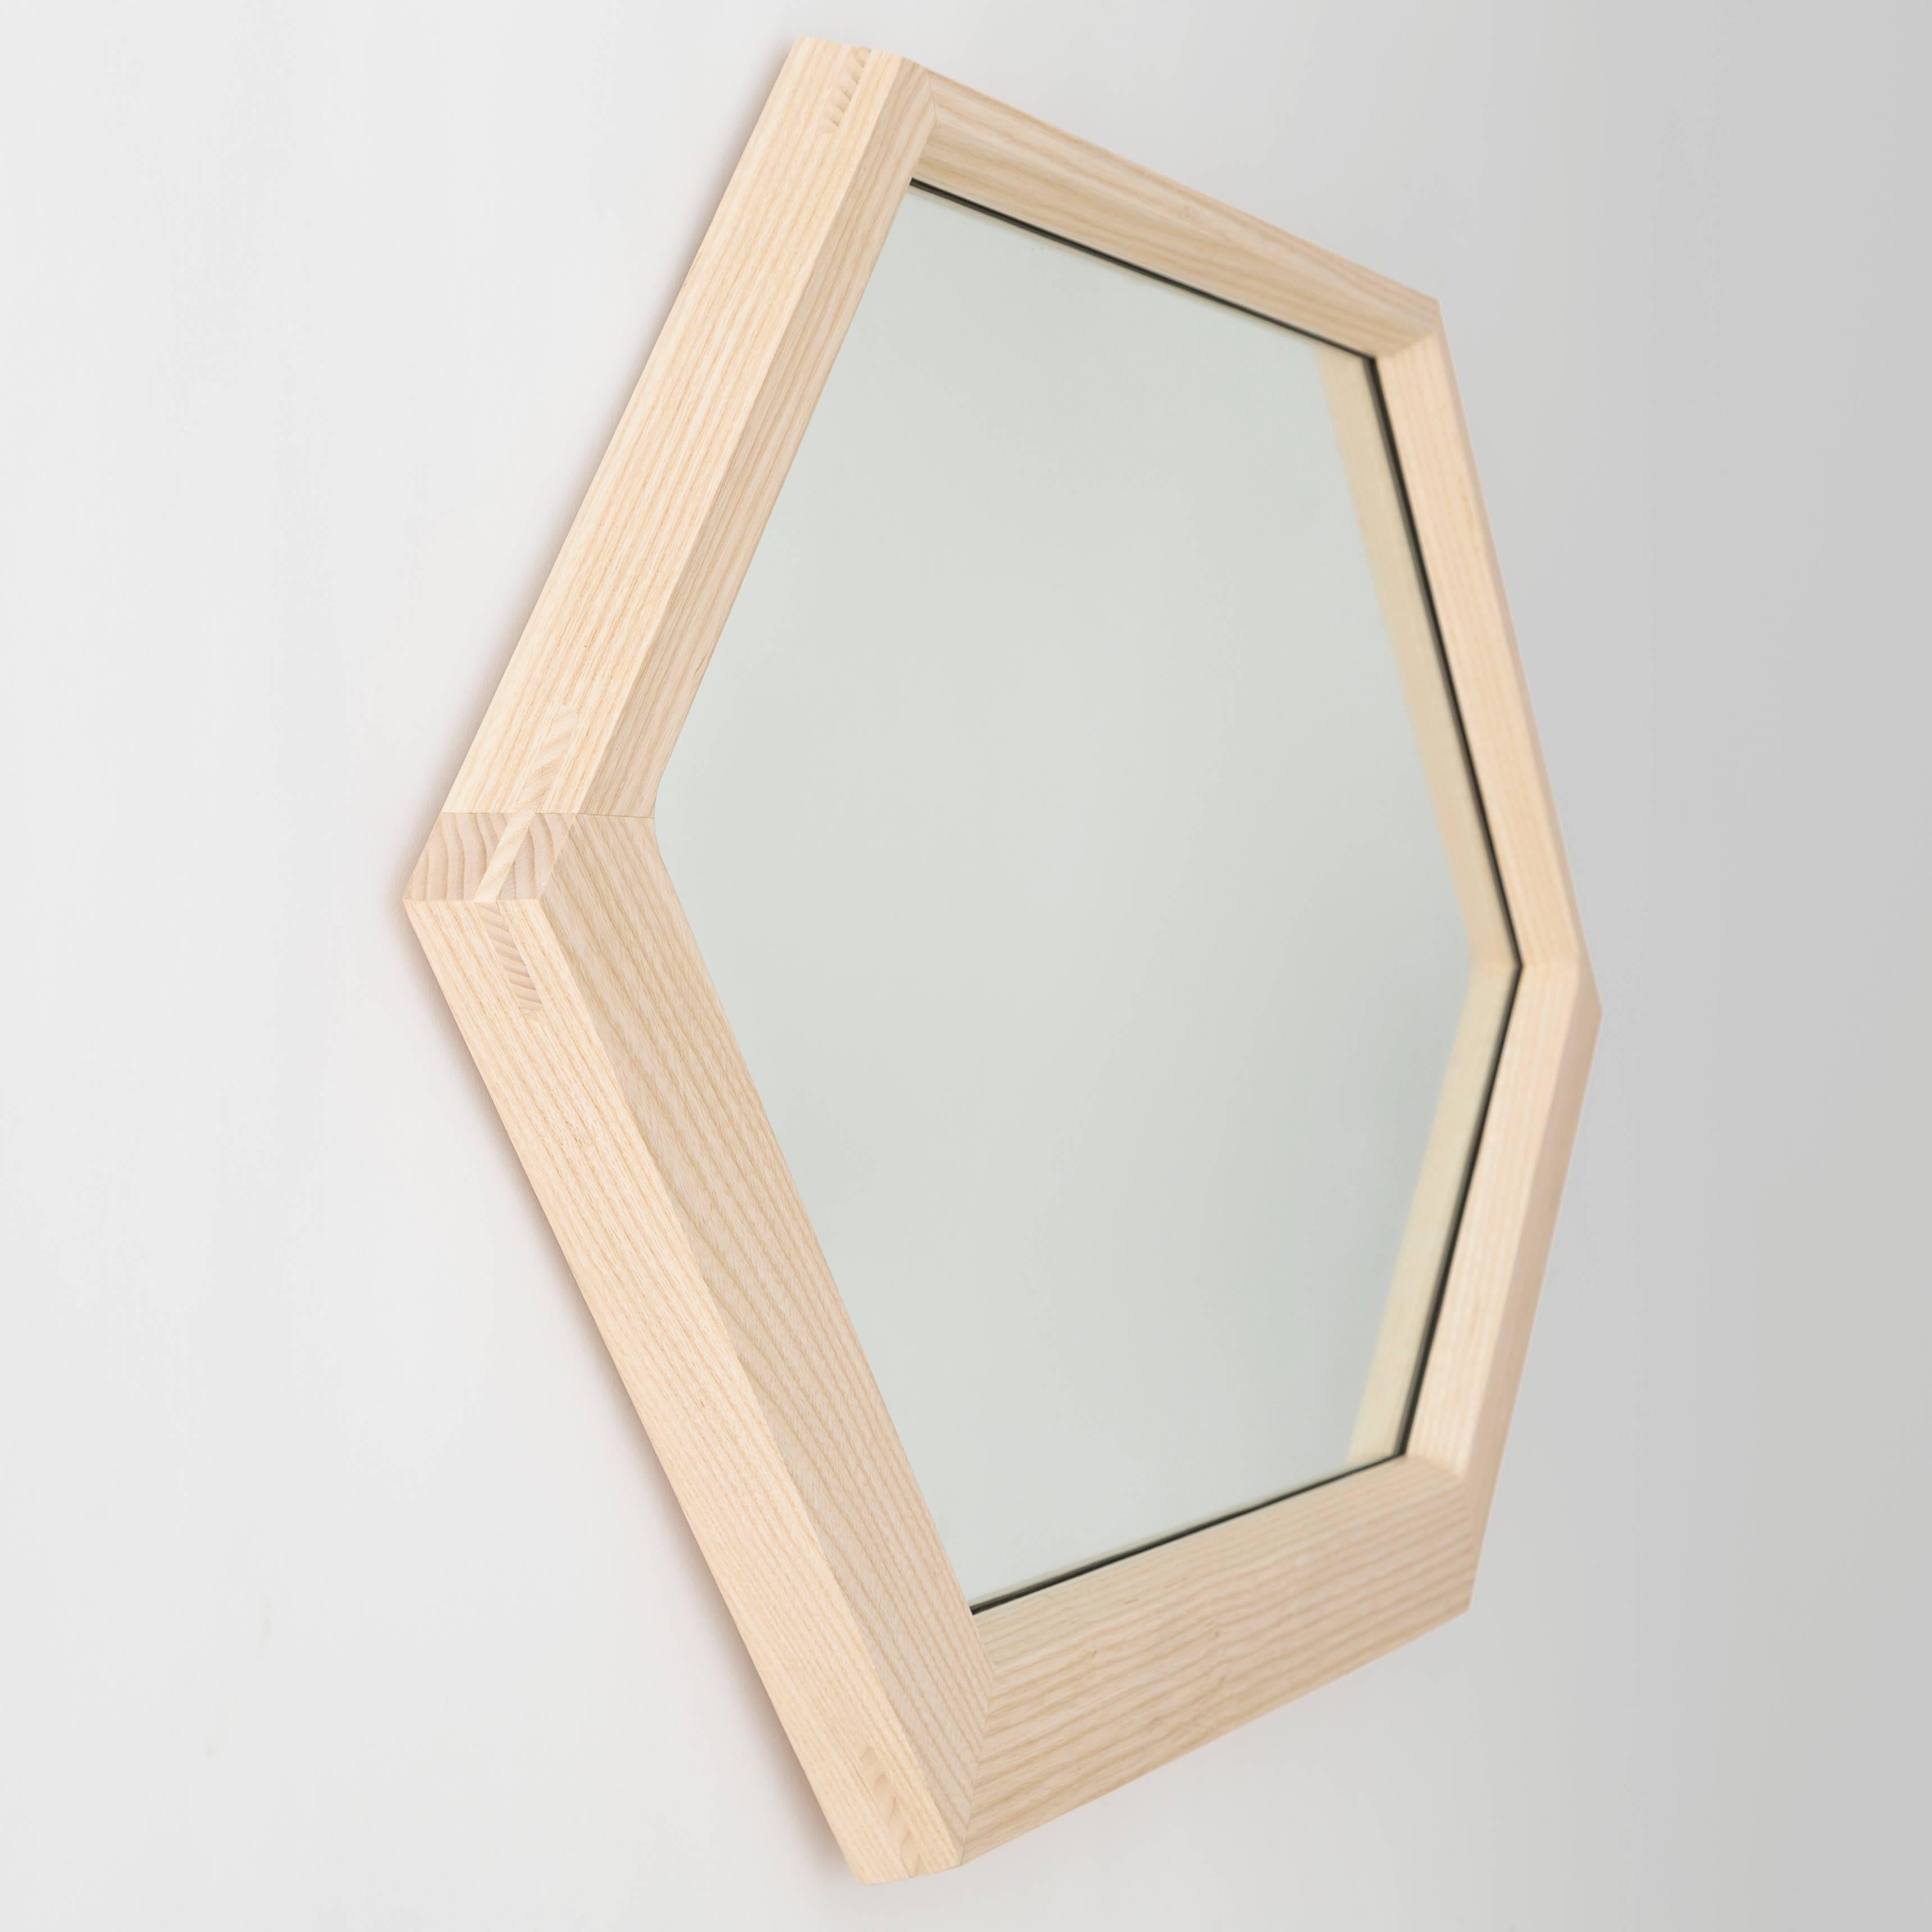 Organic Modern Trance Mirror in Solid Ash - AVAILABLE NOW For Sale